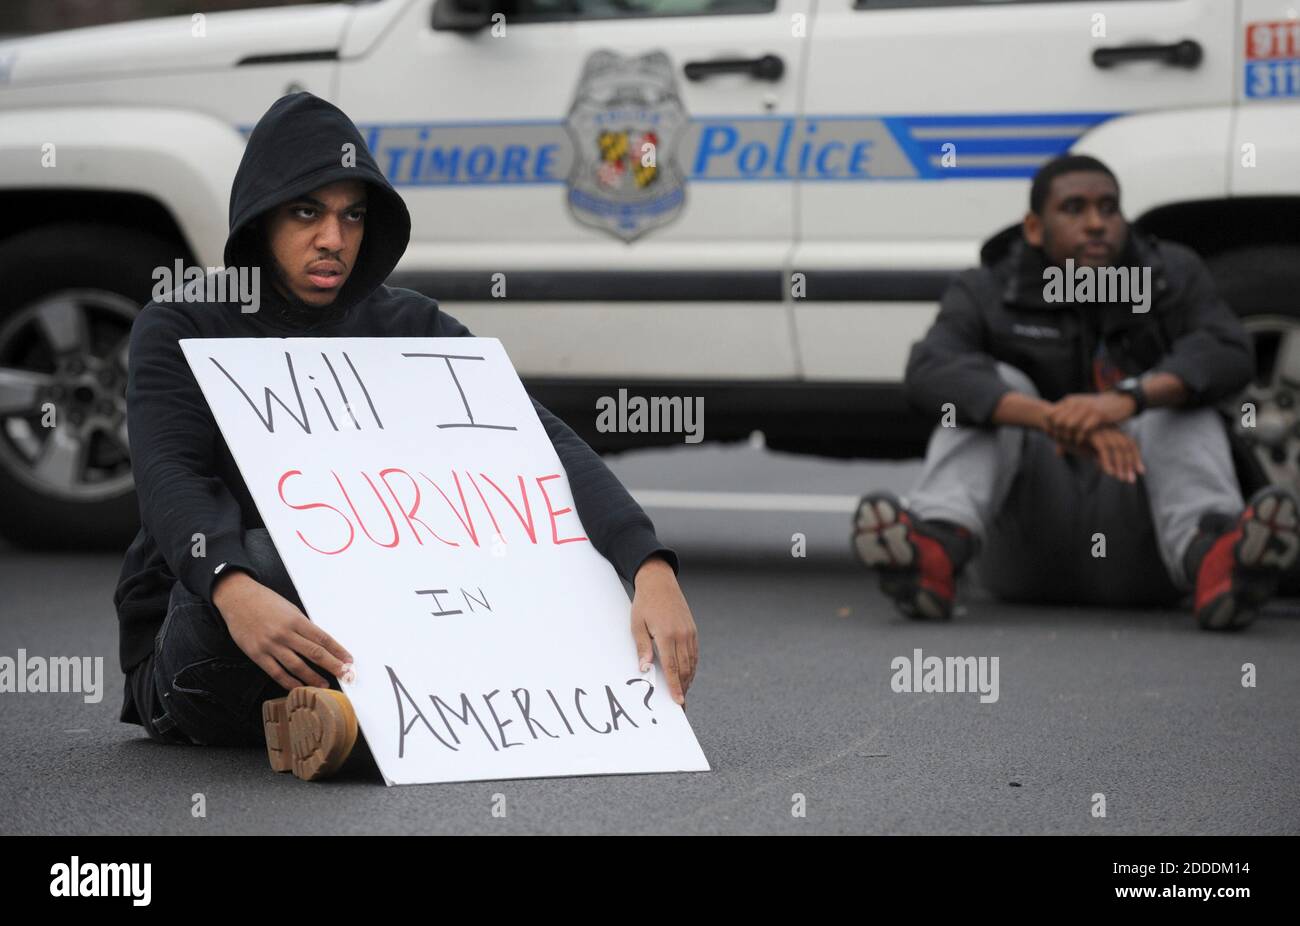 NO FILM, NO VIDEO, NO TV, NO DOCUMENTARY - Jimmy Sellers, a Morgan State senior, sits in the intersection of Perring Parkway and Cold Spring Lane during a a rally in Baltimore, MD, USA, on Tuesday, Nov. 25, 2014, in the wake of the grand jury decision not to indict officer Darren Wilson in the shooting death of Ferguson, Mo., teen Michael Brown. Photo by Jerry Jackson/Baltimore Sun/TNS/ABACAPRESS.COM Stock Photo